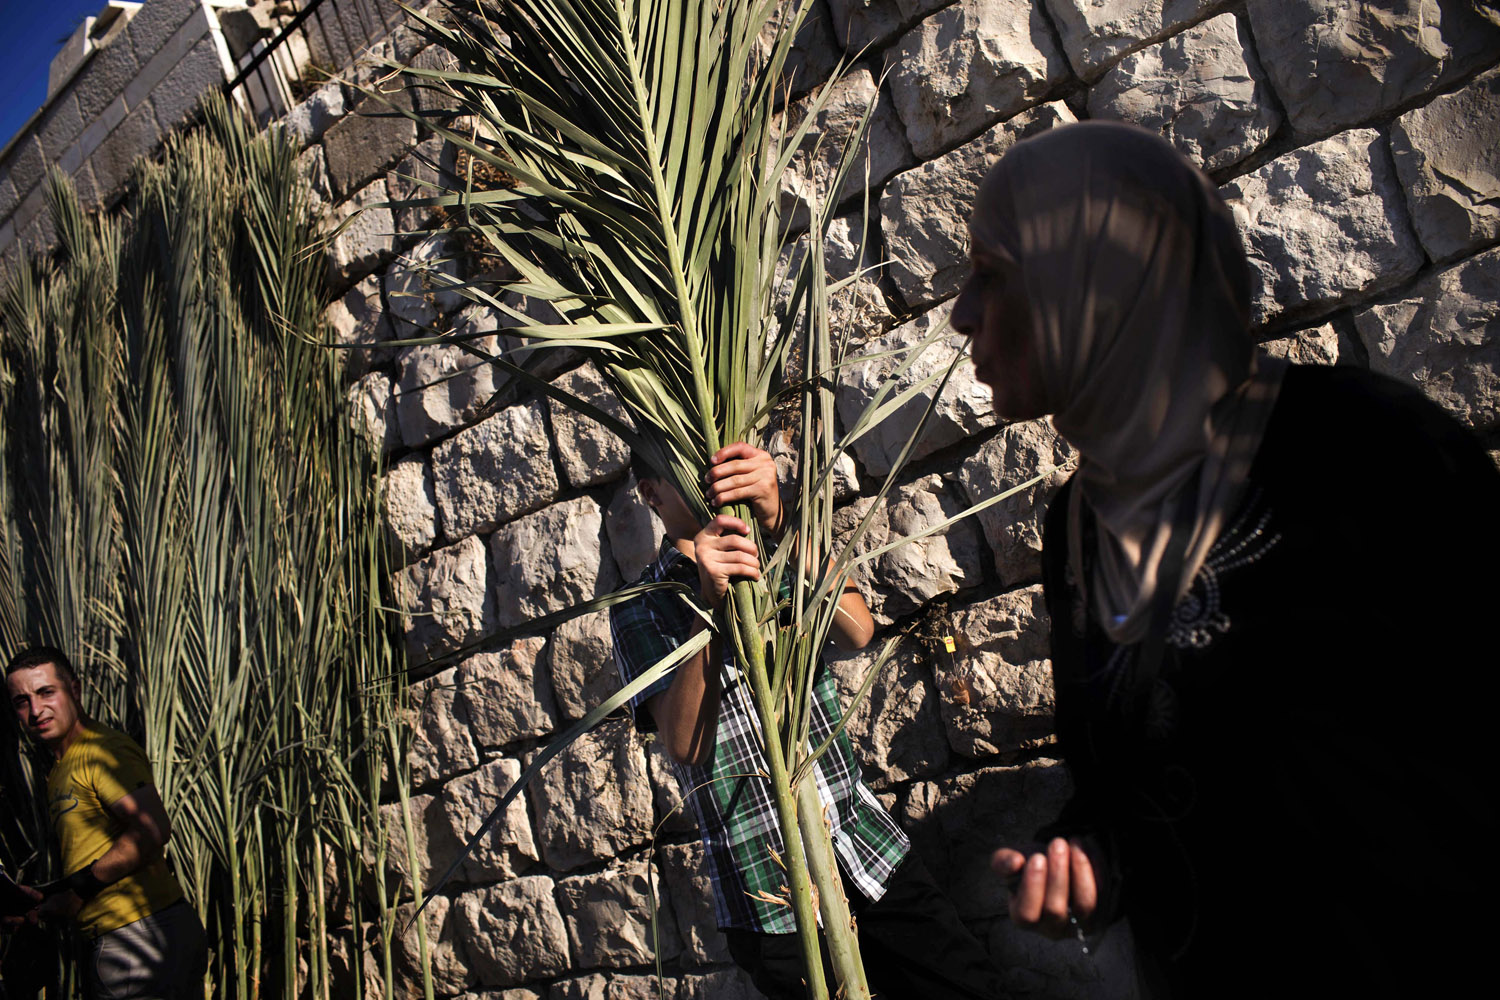 Aug. 19, 2012. A Palestinian man carries palm fronds to lay on the graves of relatives during the first day of Eid al-Fitr, which marks the end of the Muslim fasting month of Ramadan, outside Jerusalem's Old City.